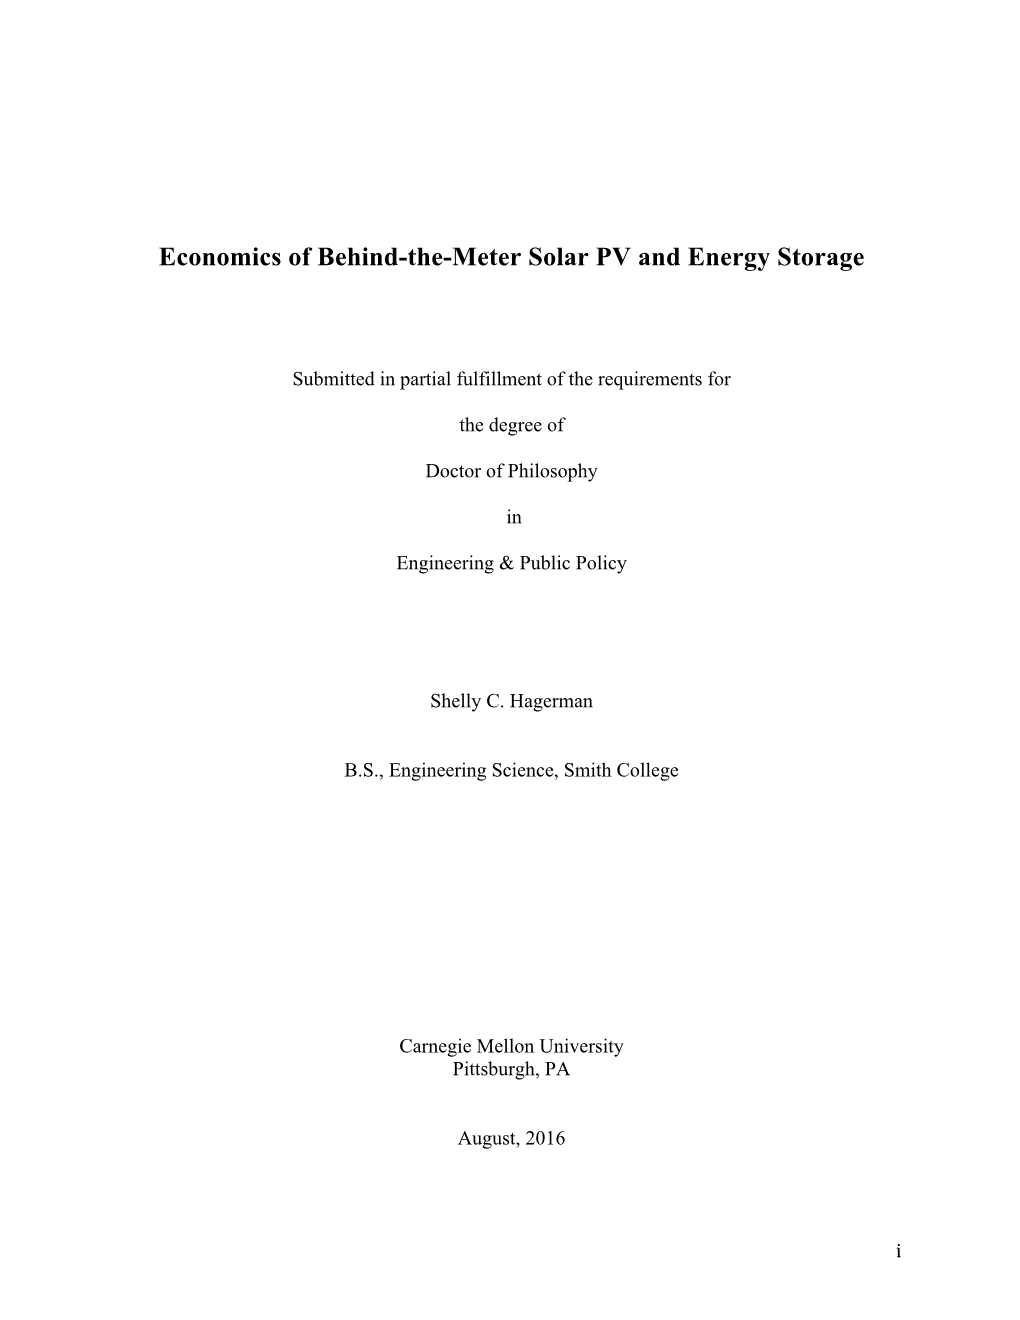 Economics of Behind-The-Meter Solar PV and Energy Storage